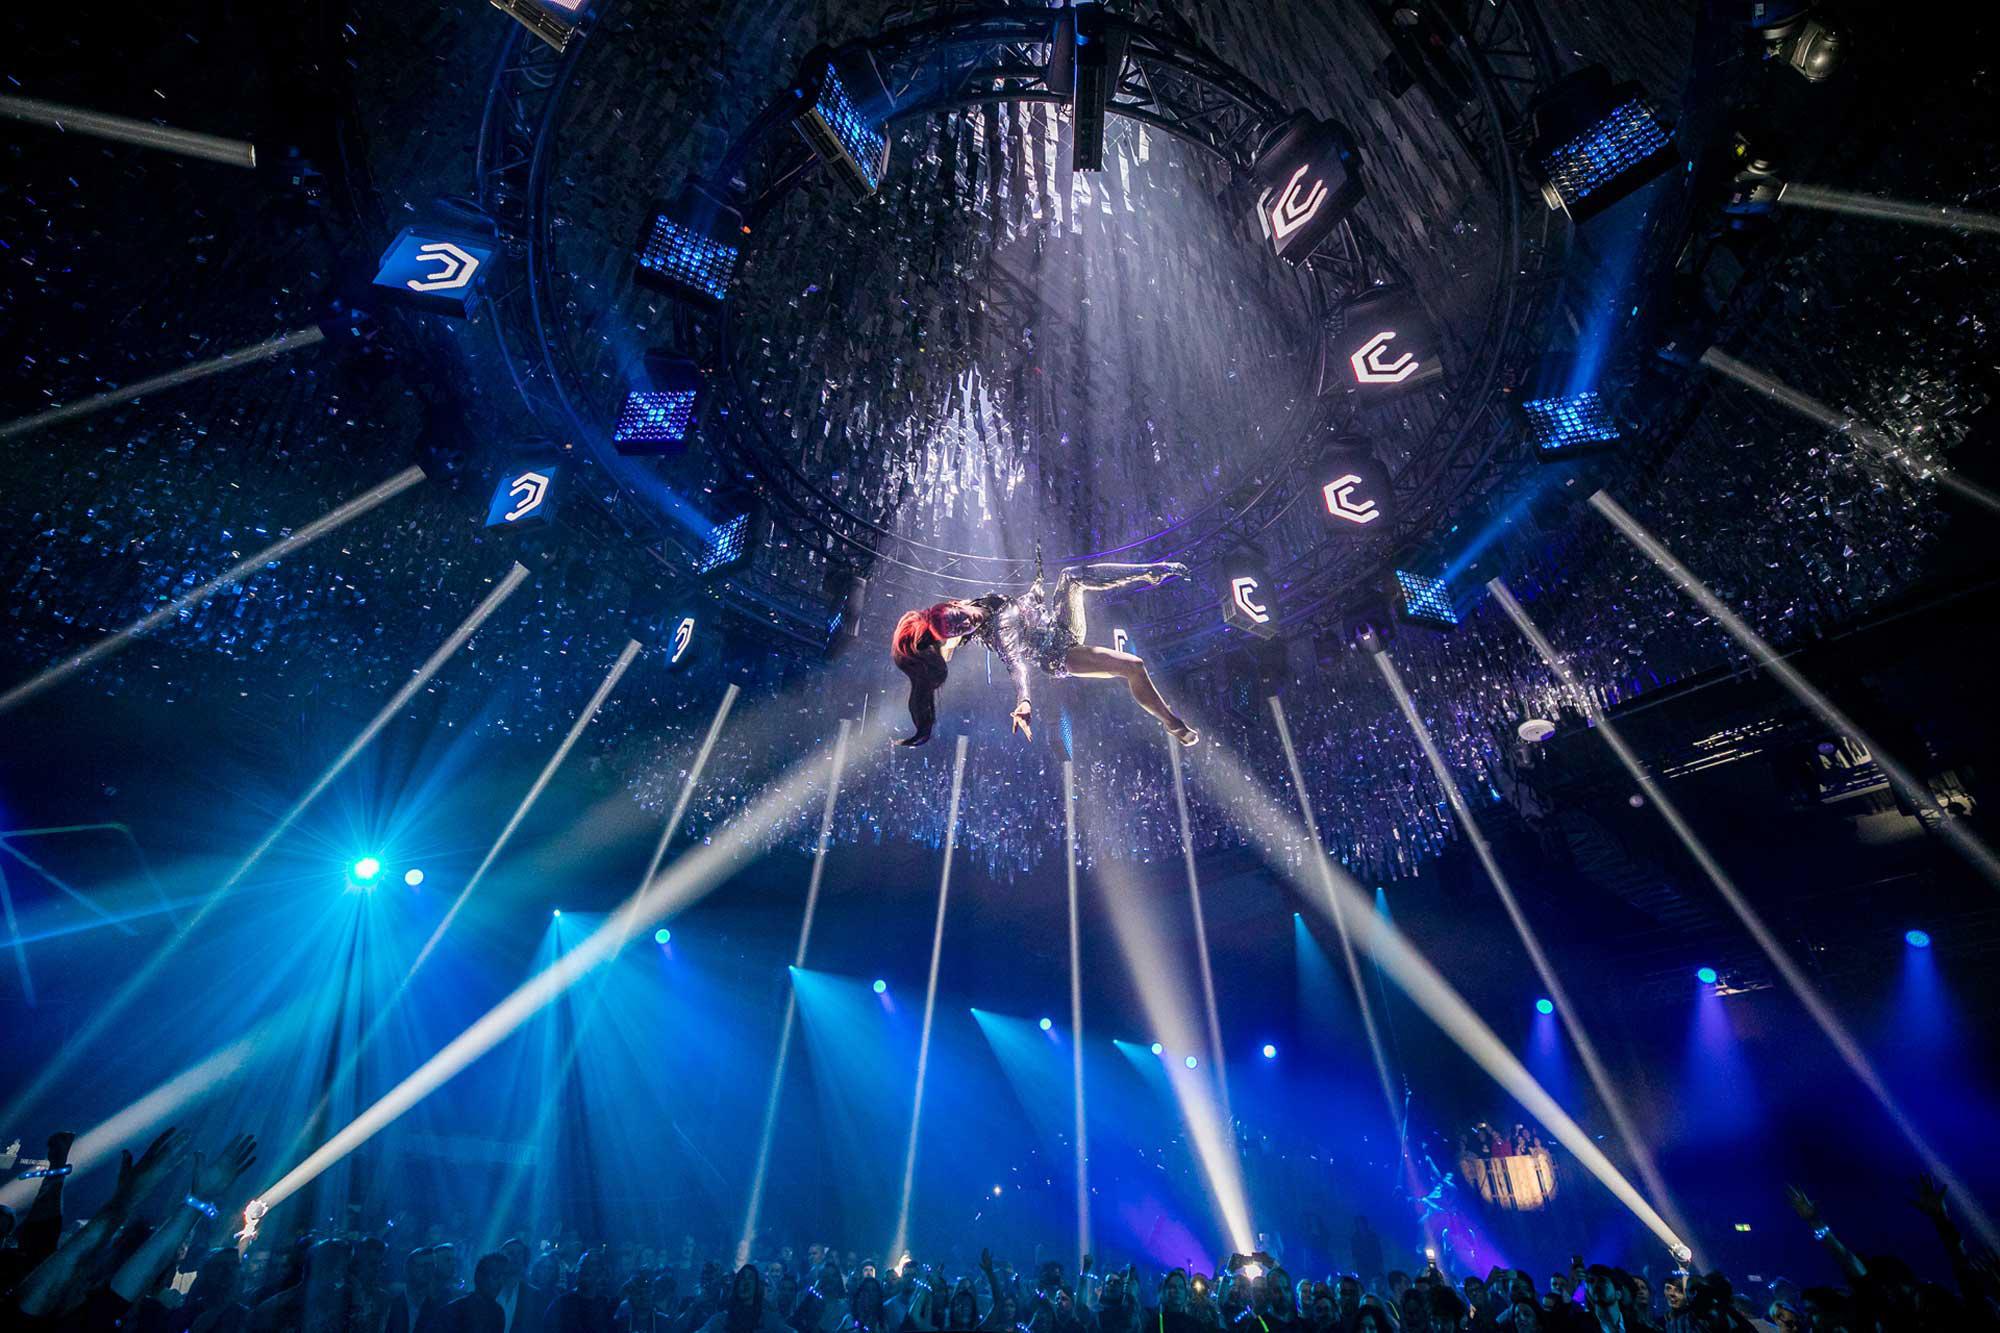 An acrobat hangs horizontally from the ceiling, descending from circular trusses with square club lights beaming from its circumference. Beams of white light shine onto the acrobat, whose long red hair and right hand reach down towards the sea of people, lit in blue, underneath her.